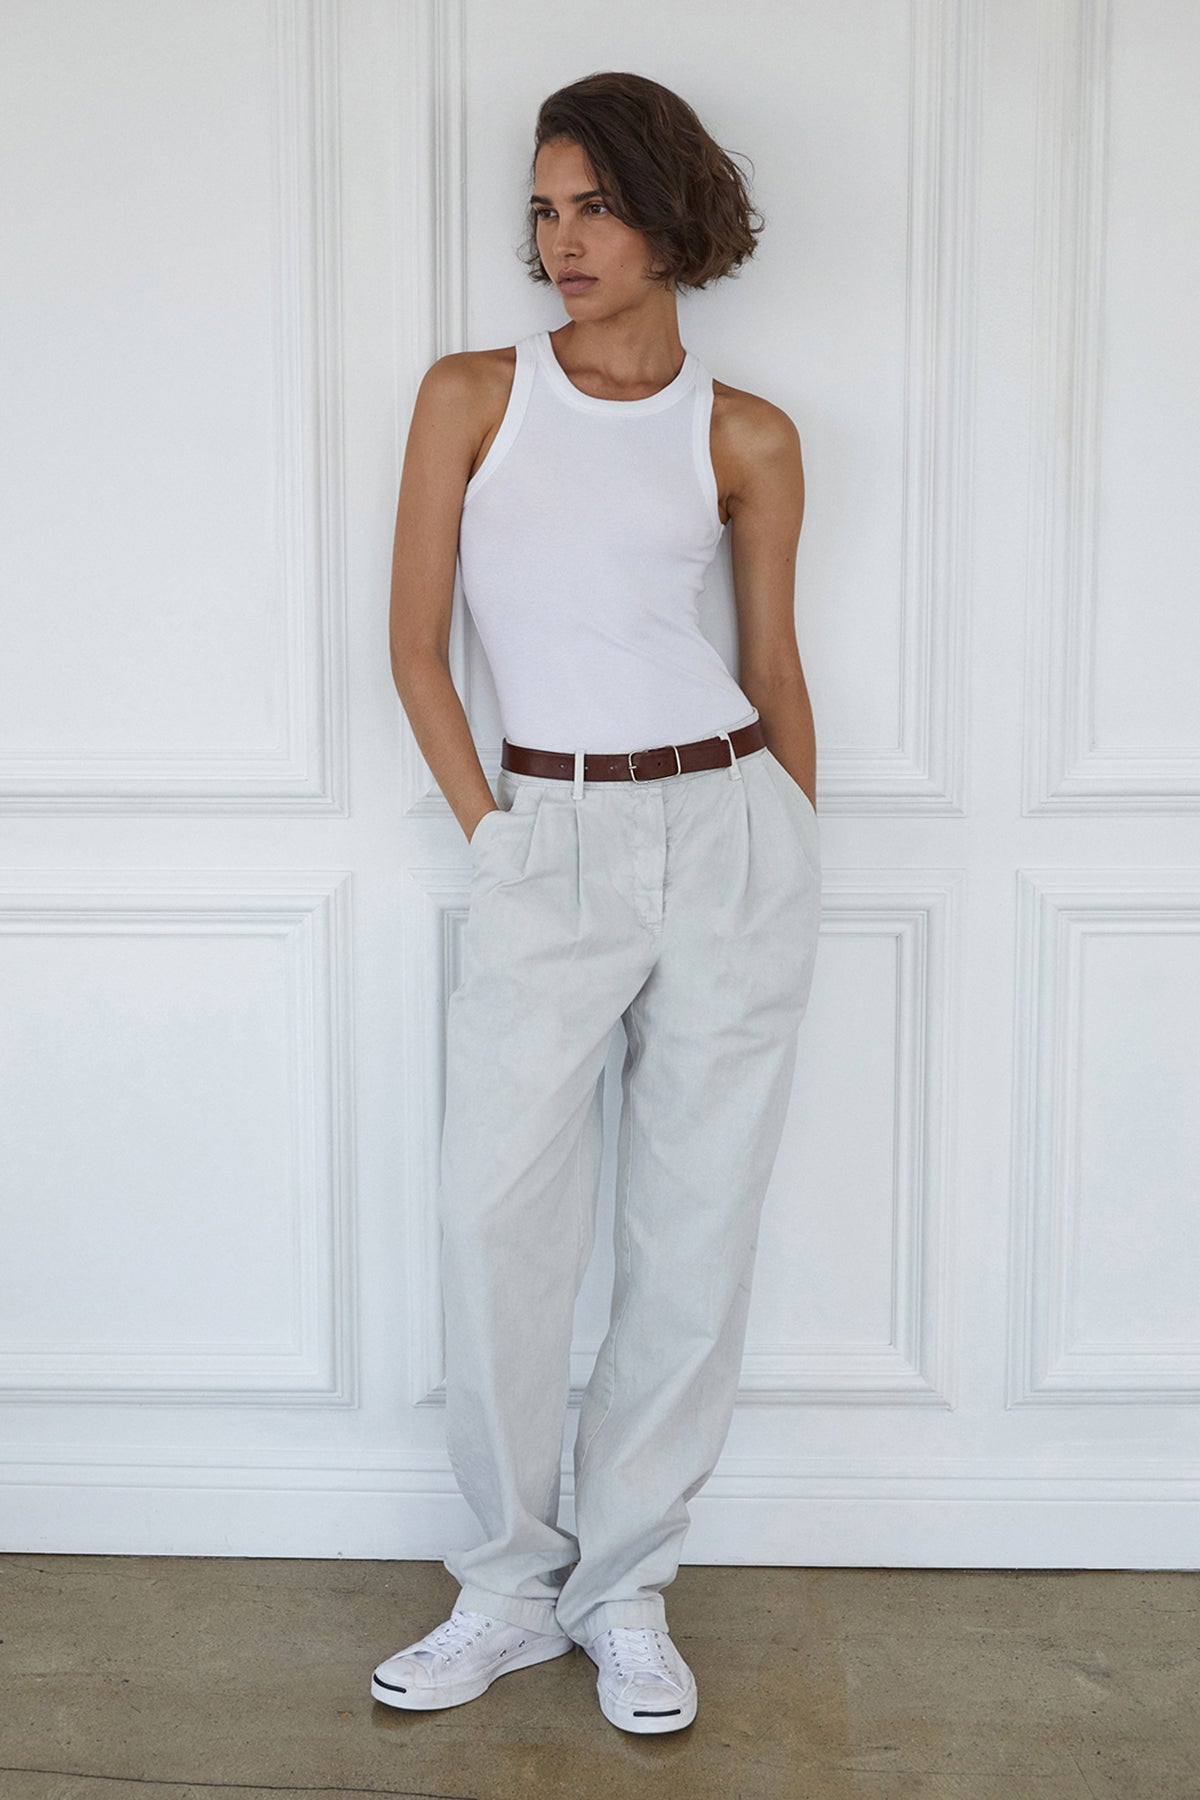   Temescal Pant in candle with Cruz tank in white full length front 